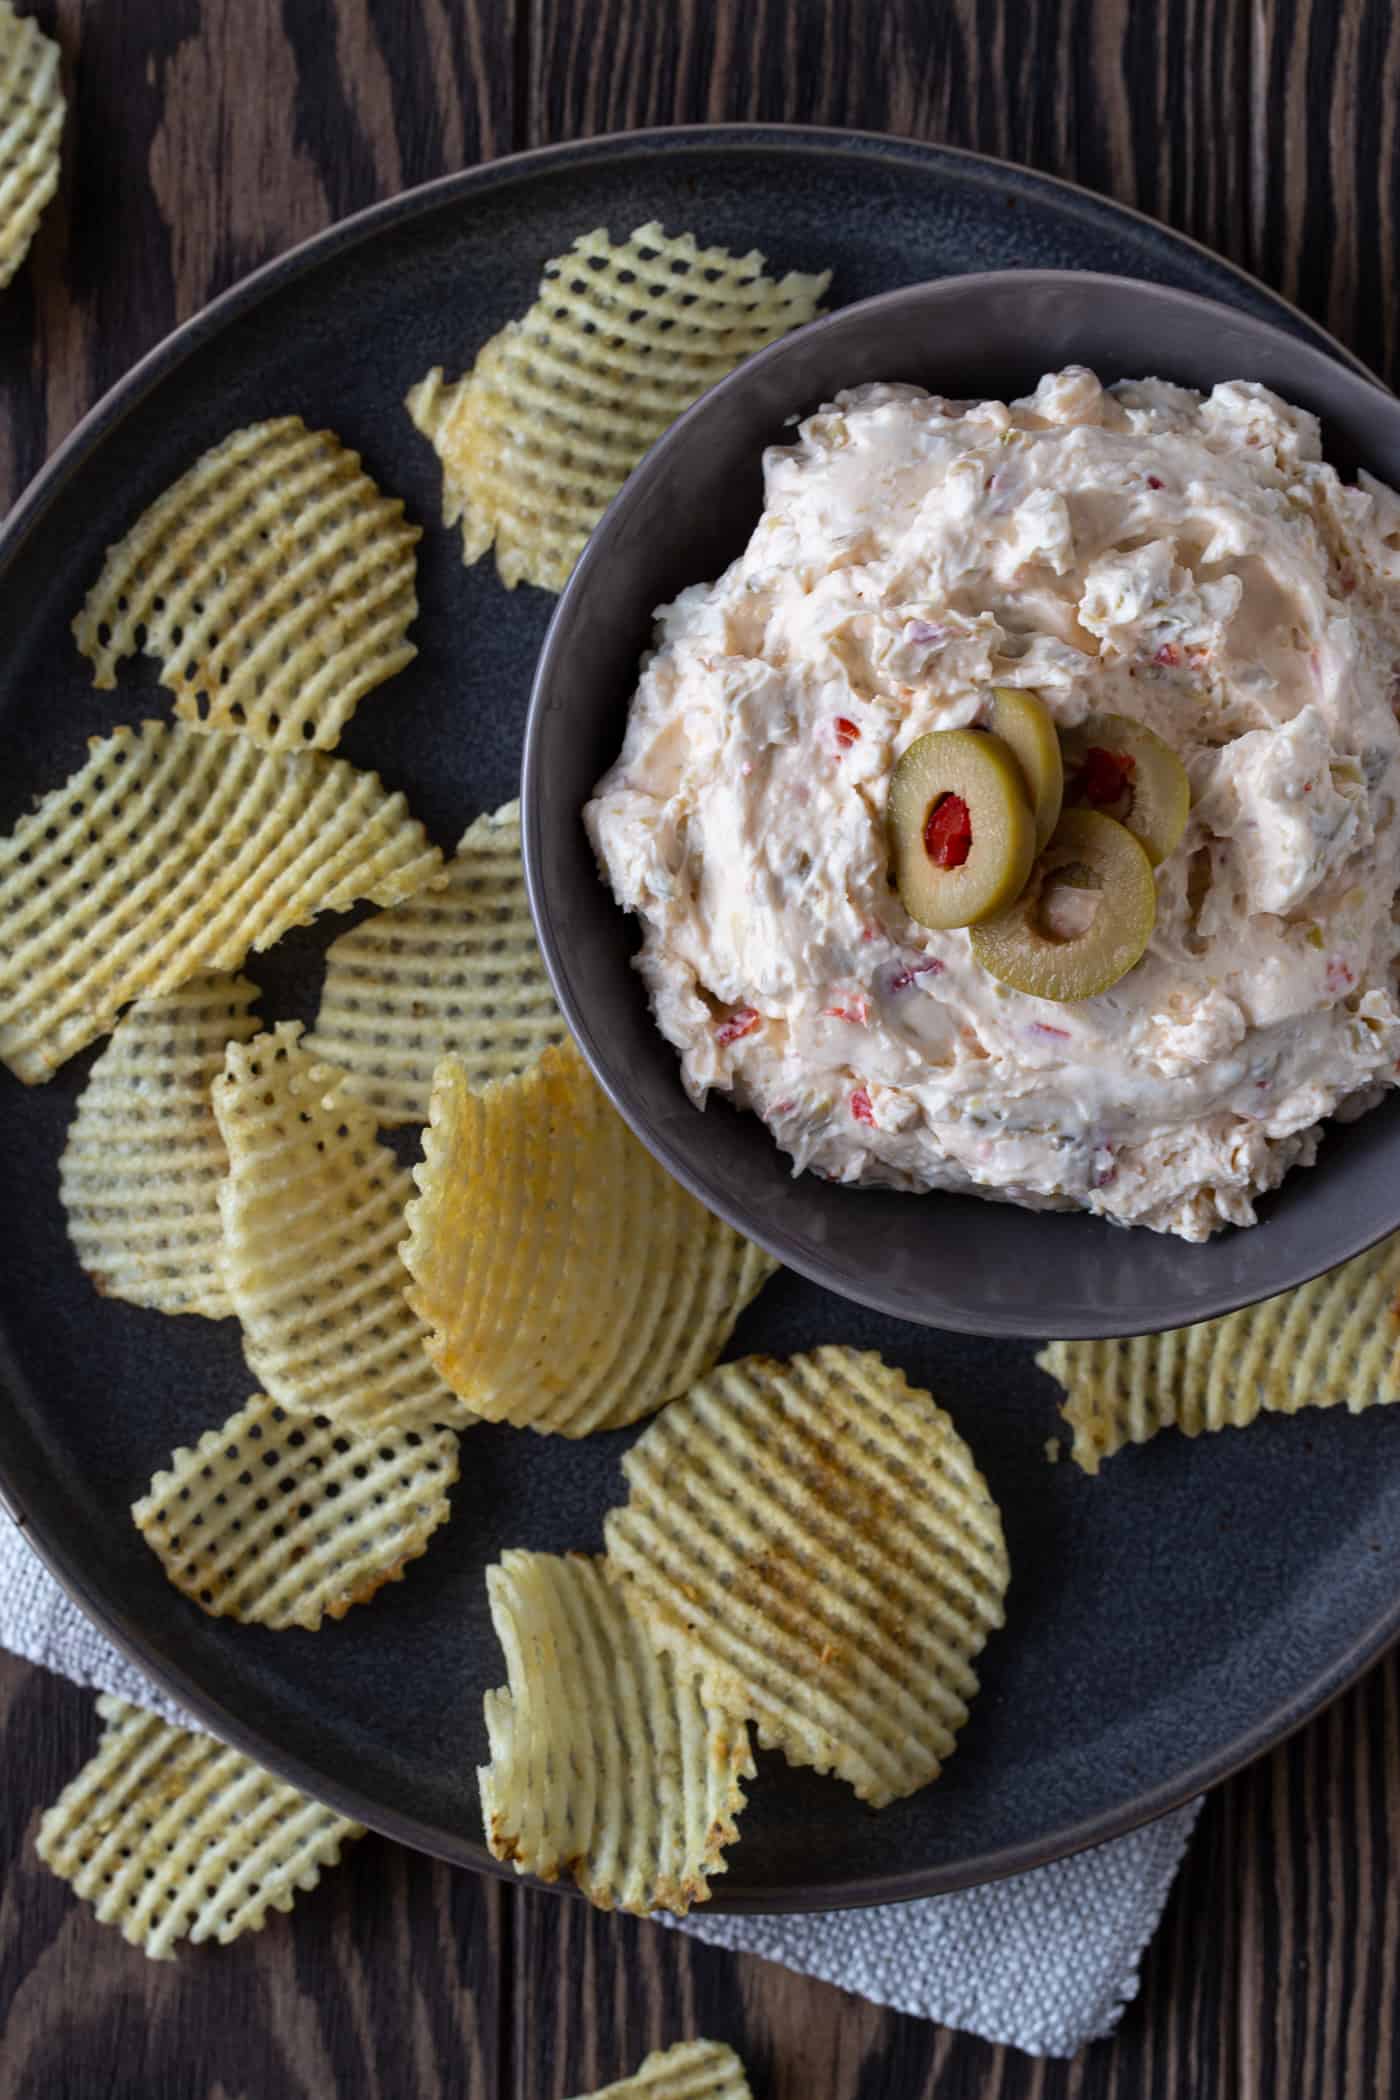 Green olive dip on a plate, with sliced olives and chips.